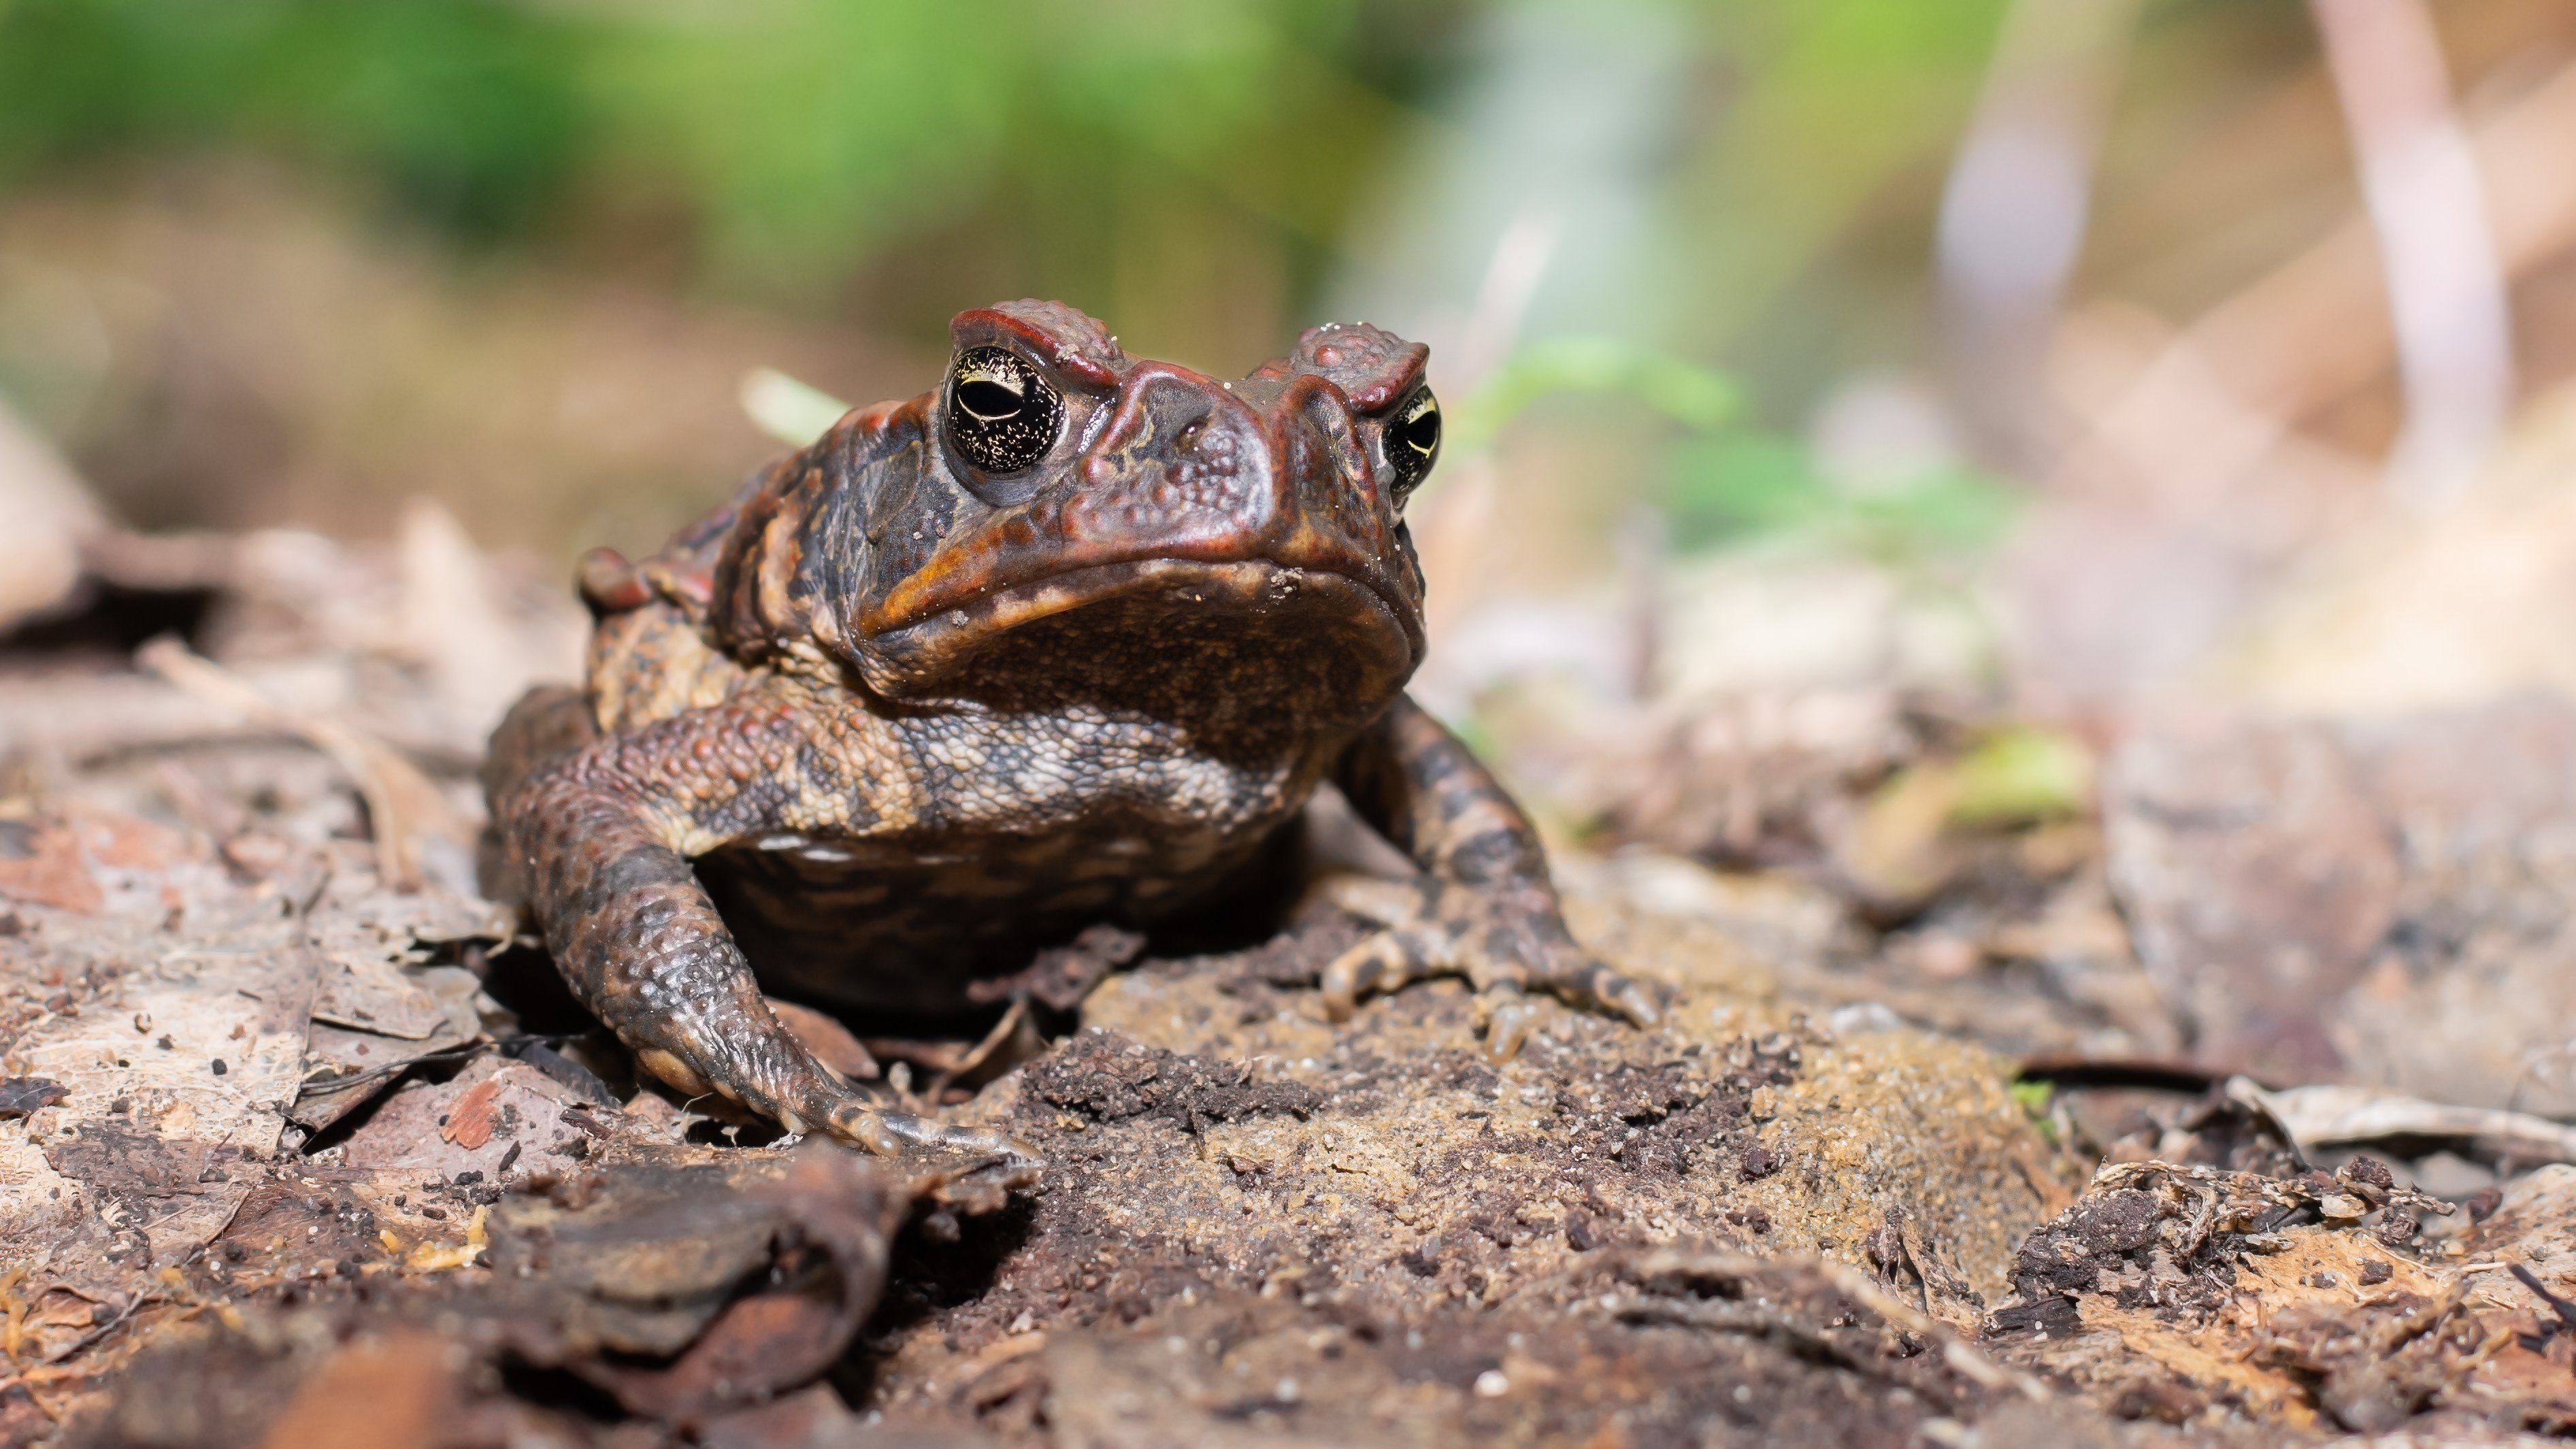 Photos of wild frogs from Australia - Cane Toad